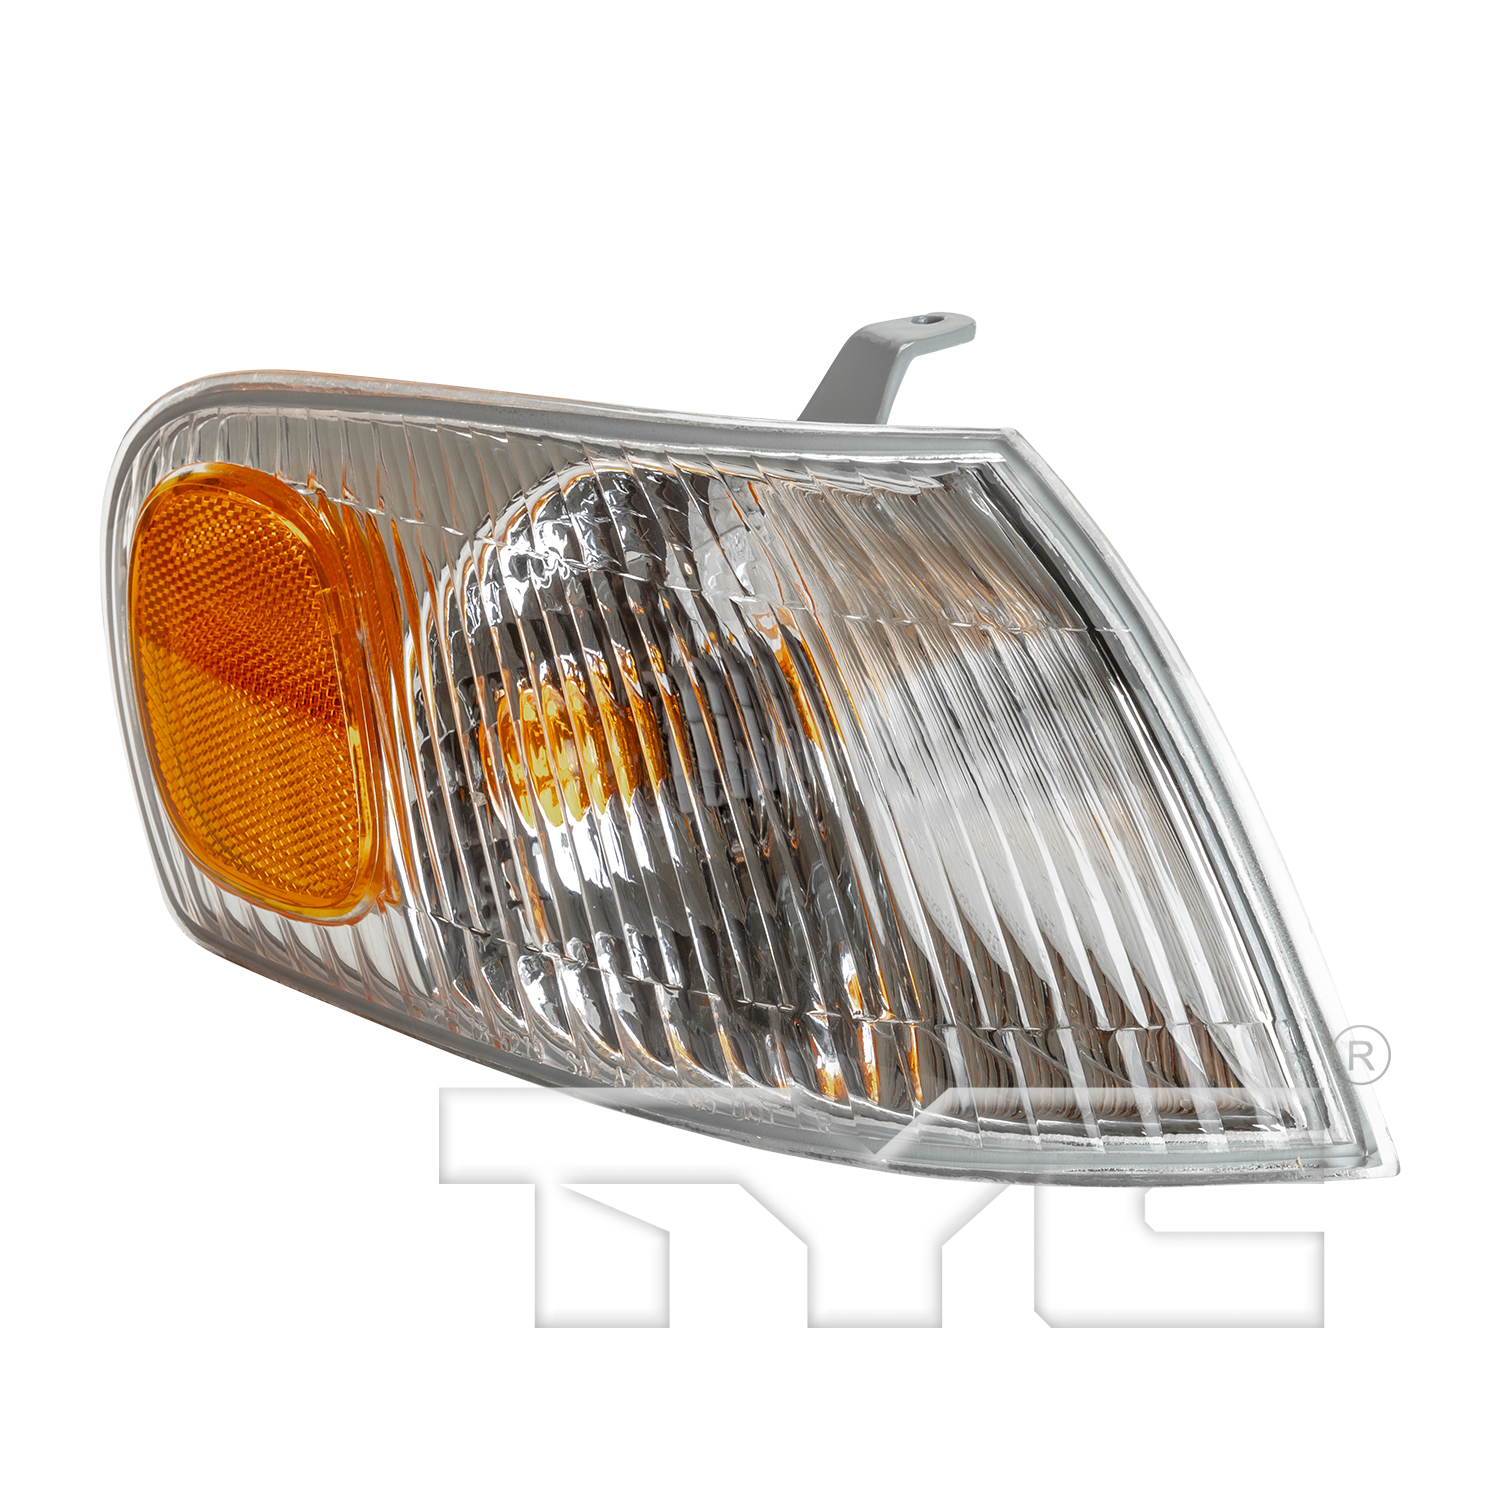 Aftermarket LAMPS for TOYOTA - COROLLA, COROLLA,98-00,RT Parklamp assy